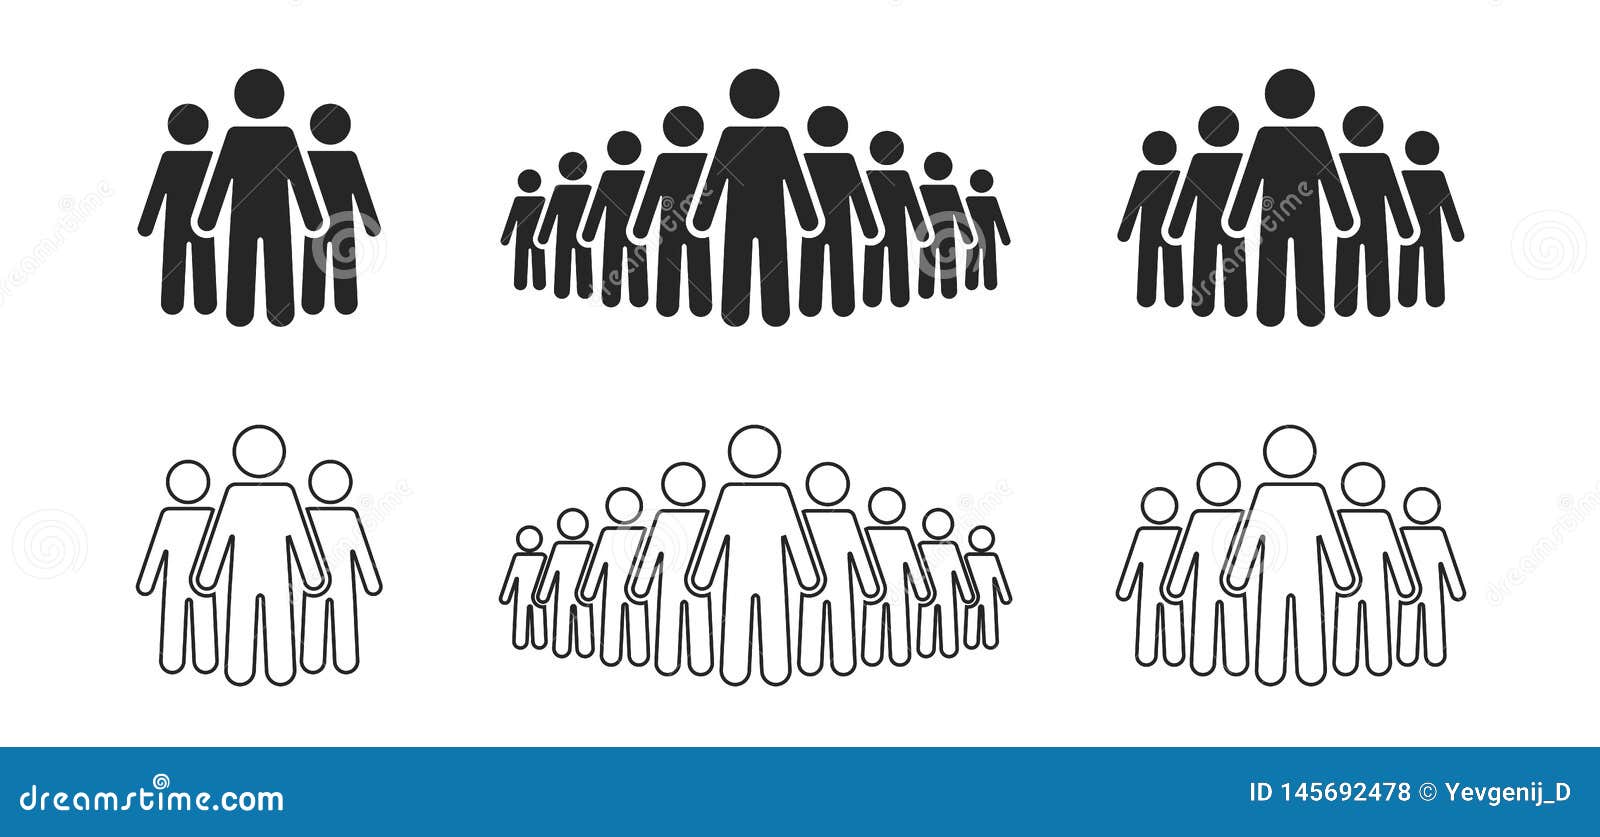 people icon set. stick figures, people crowd icon for infographic  on background